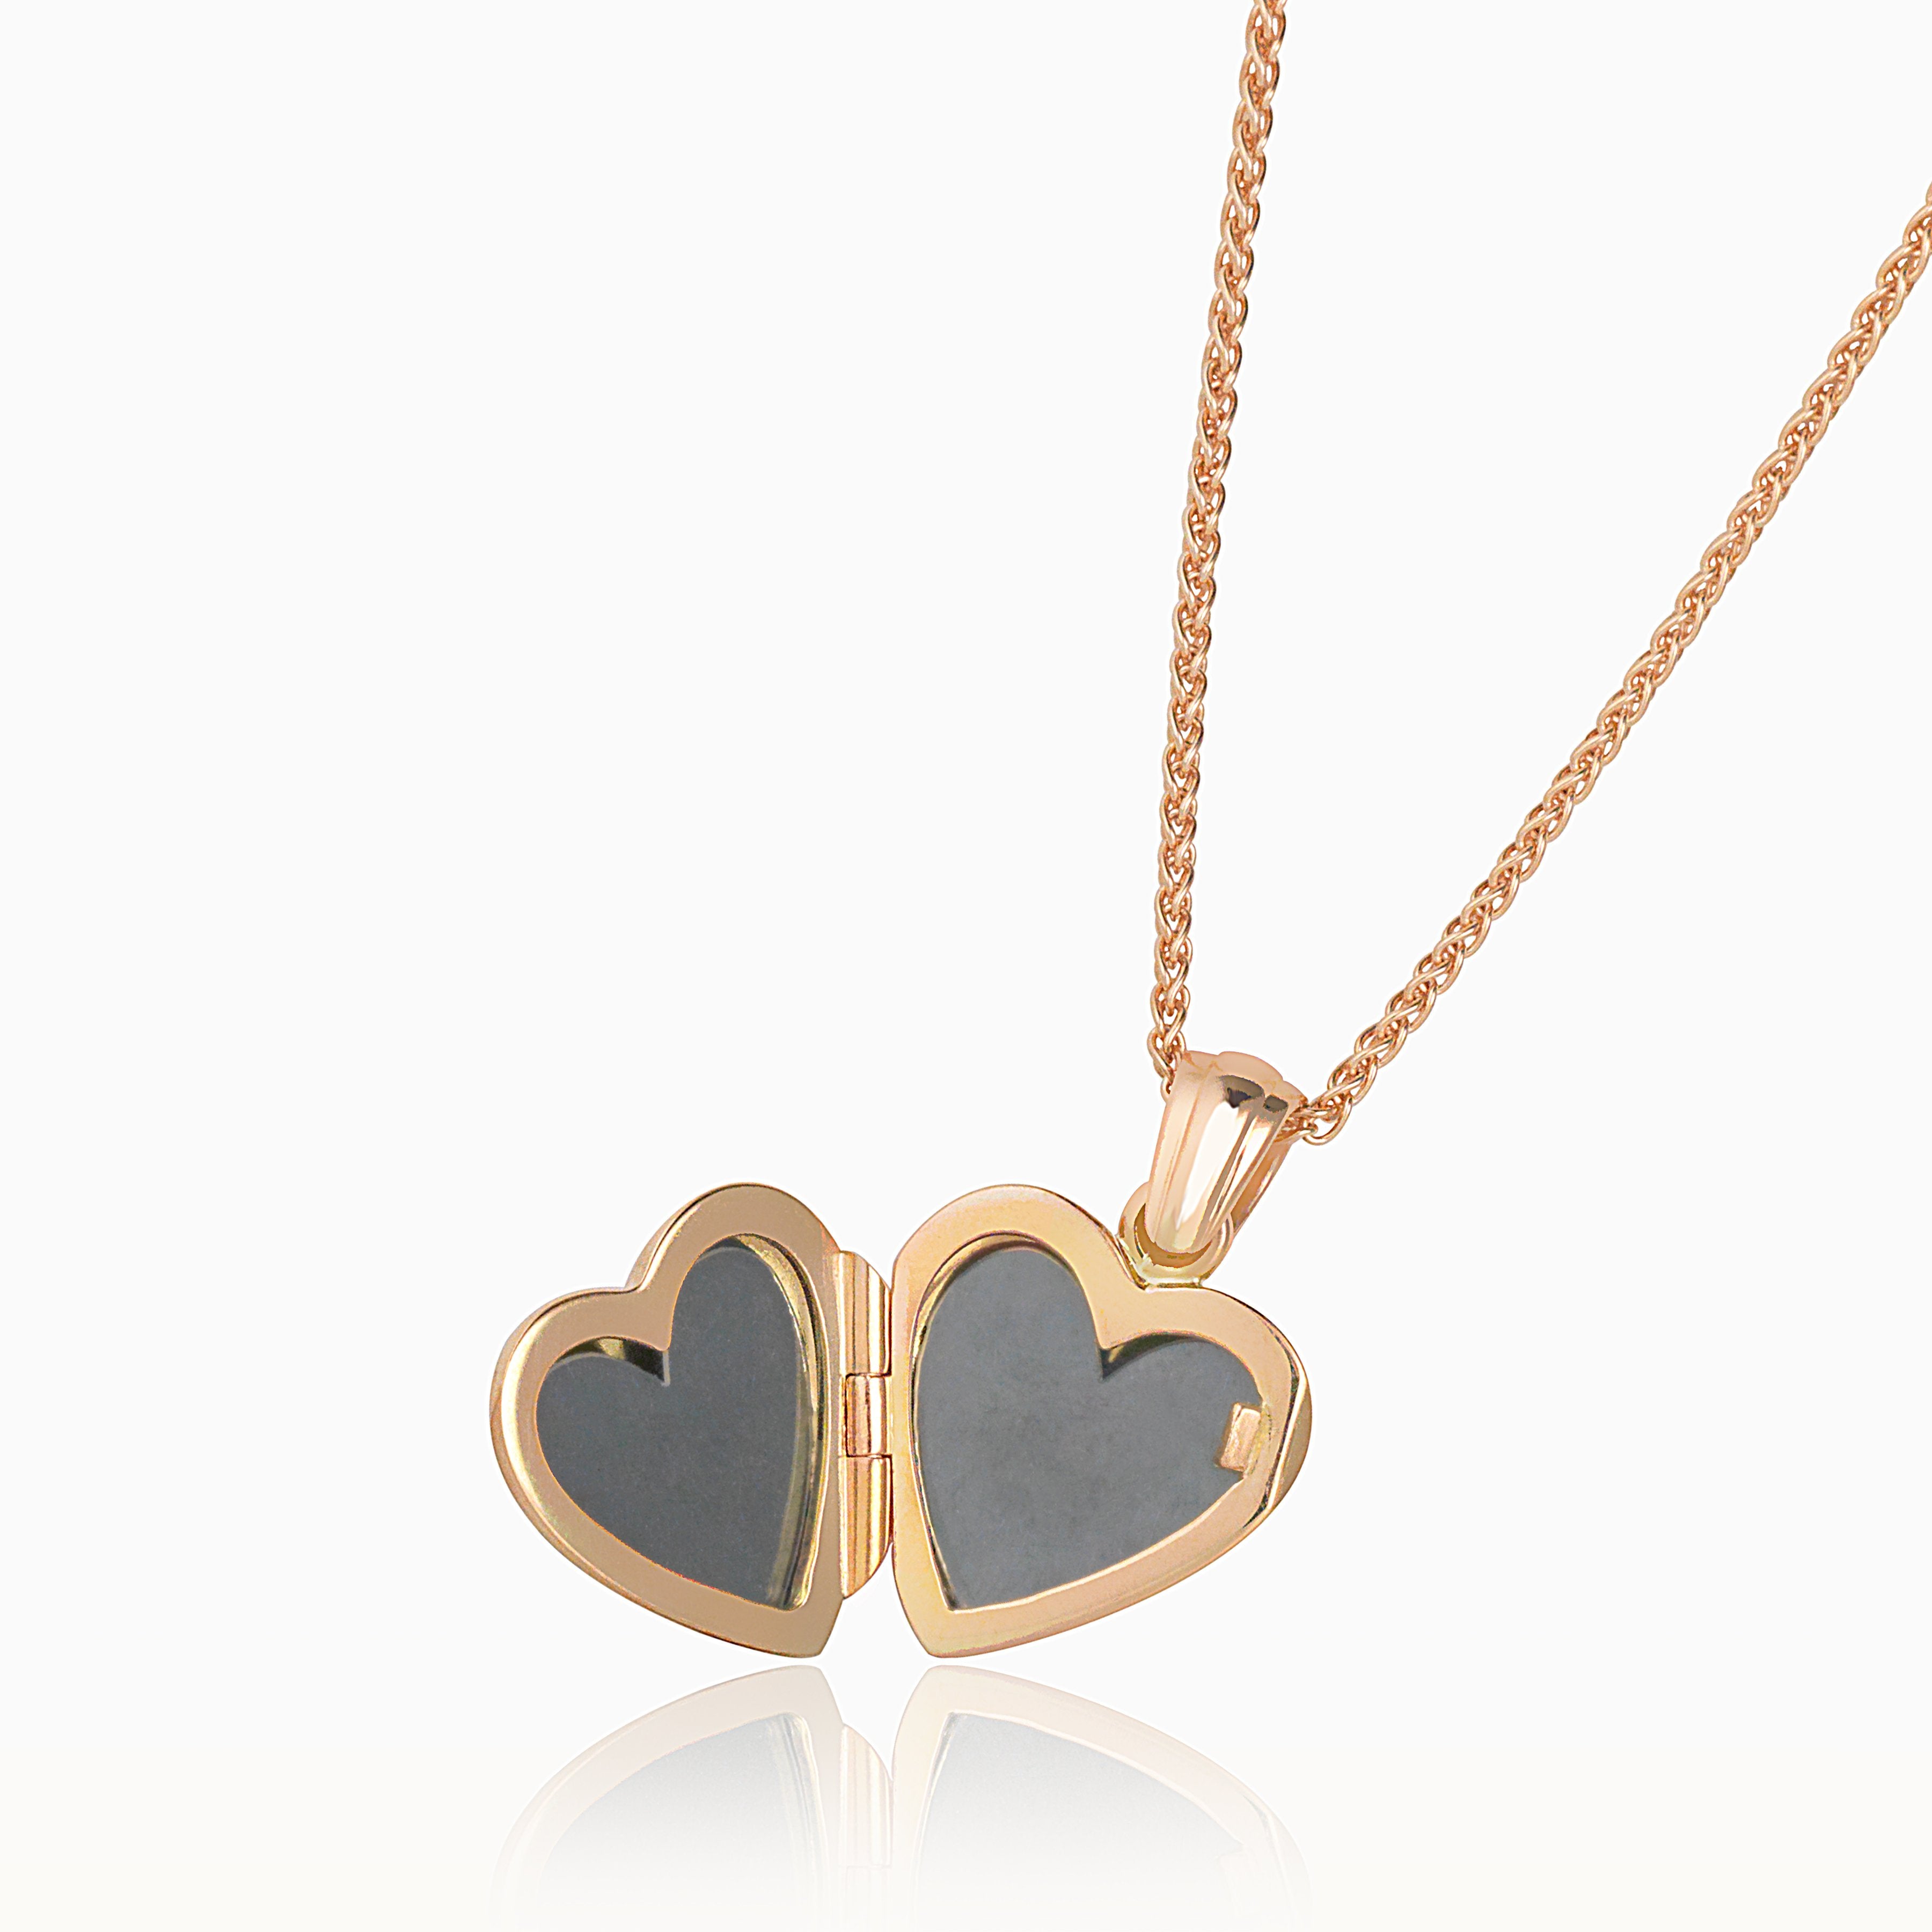 Open view of an 18 ct rose gold heart shaped locket hanging on an 18 ct rose gold spiga chain.